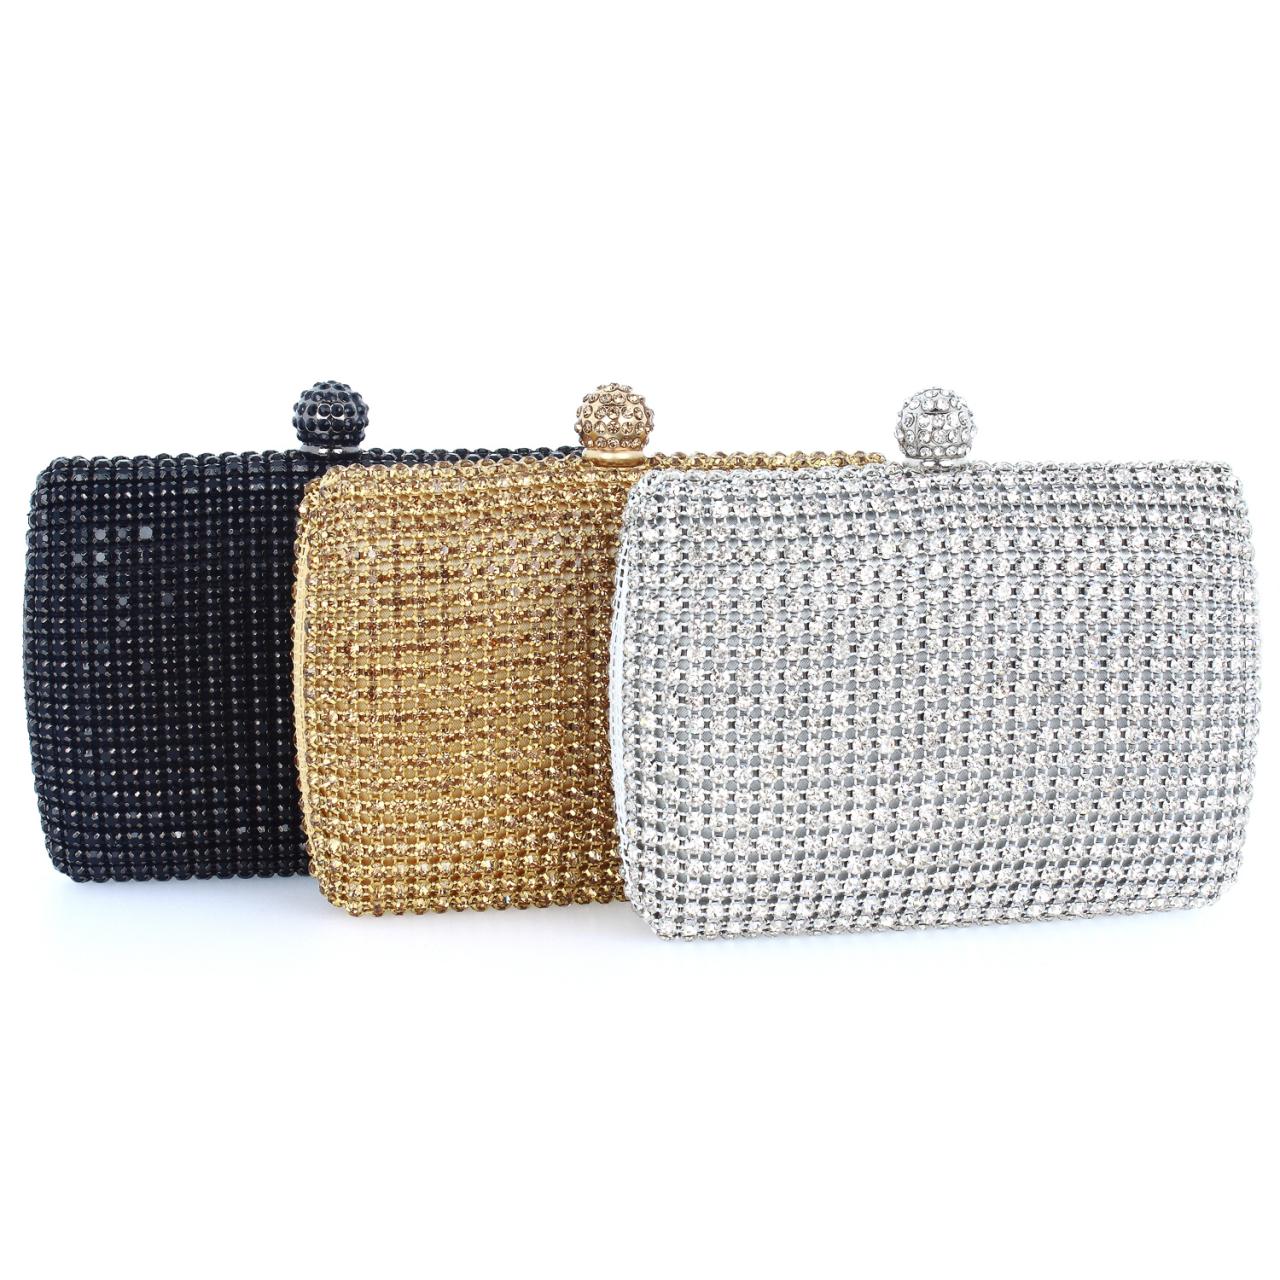 Luxury Full Crystal Evening Bags Bling Bling Classic Rhinestone Day Clutches For Lady 3 Colors 120 Cm With Chain